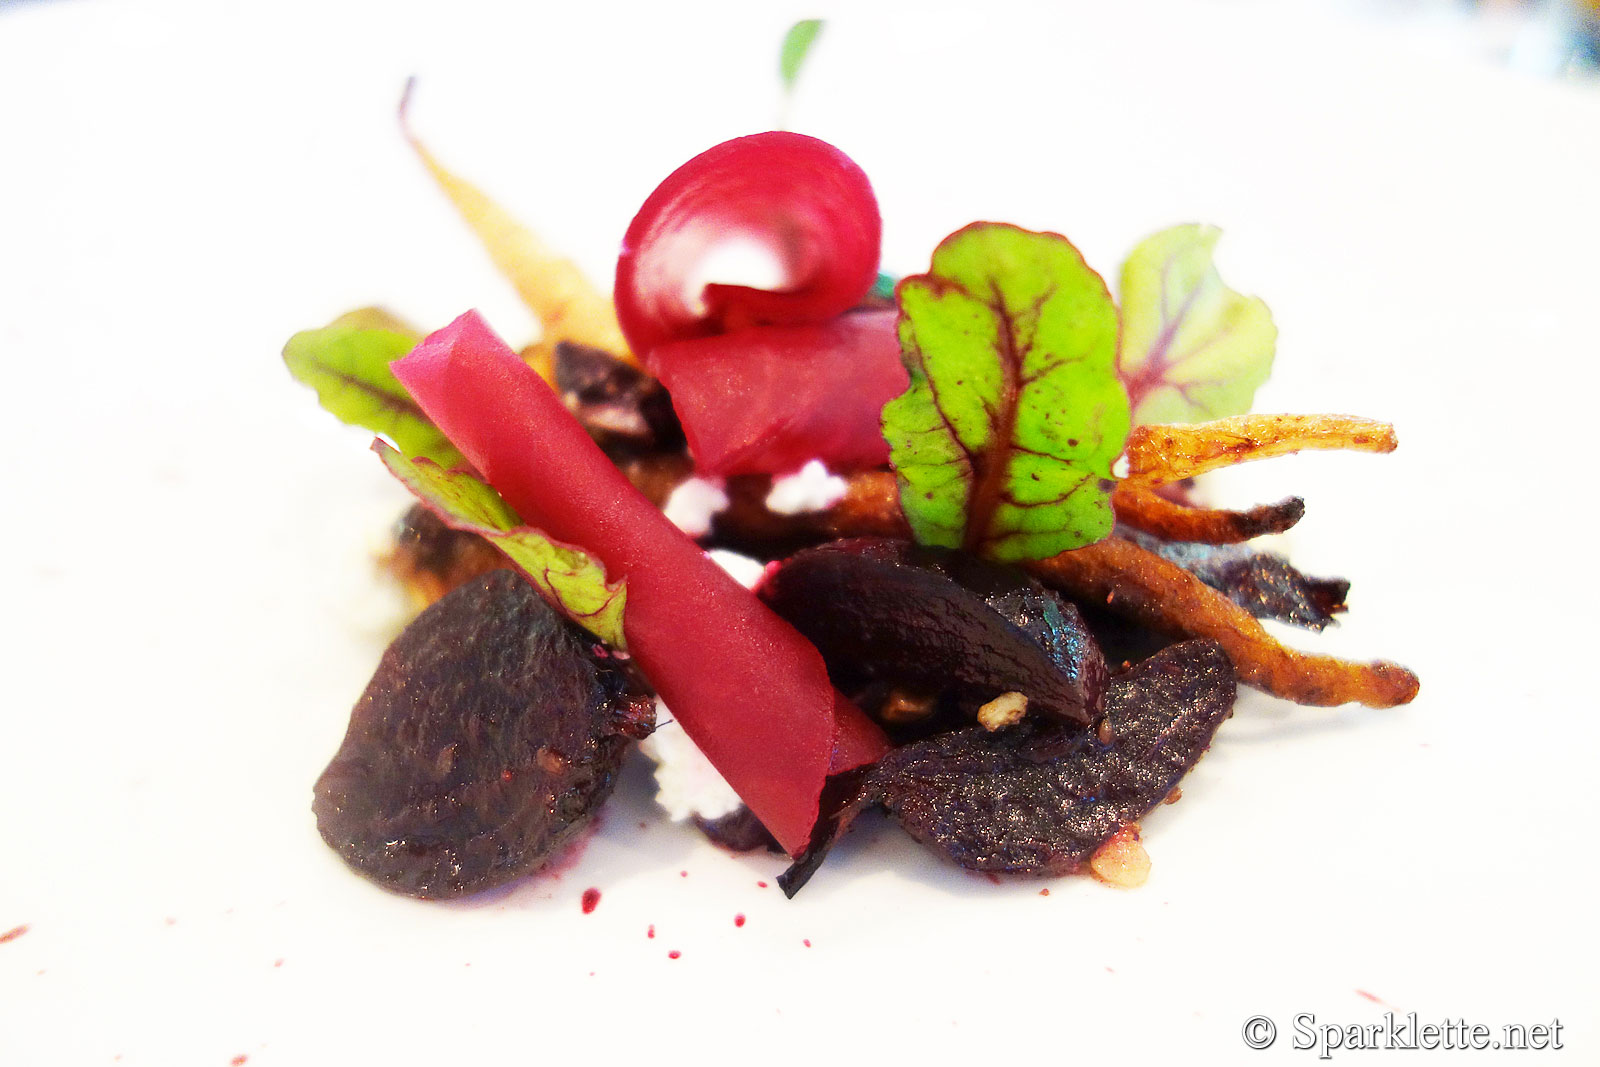 Broken tartlet of heirloom beets and carrots, Meredith goat cheese, caramelised onion, black olive and walnut